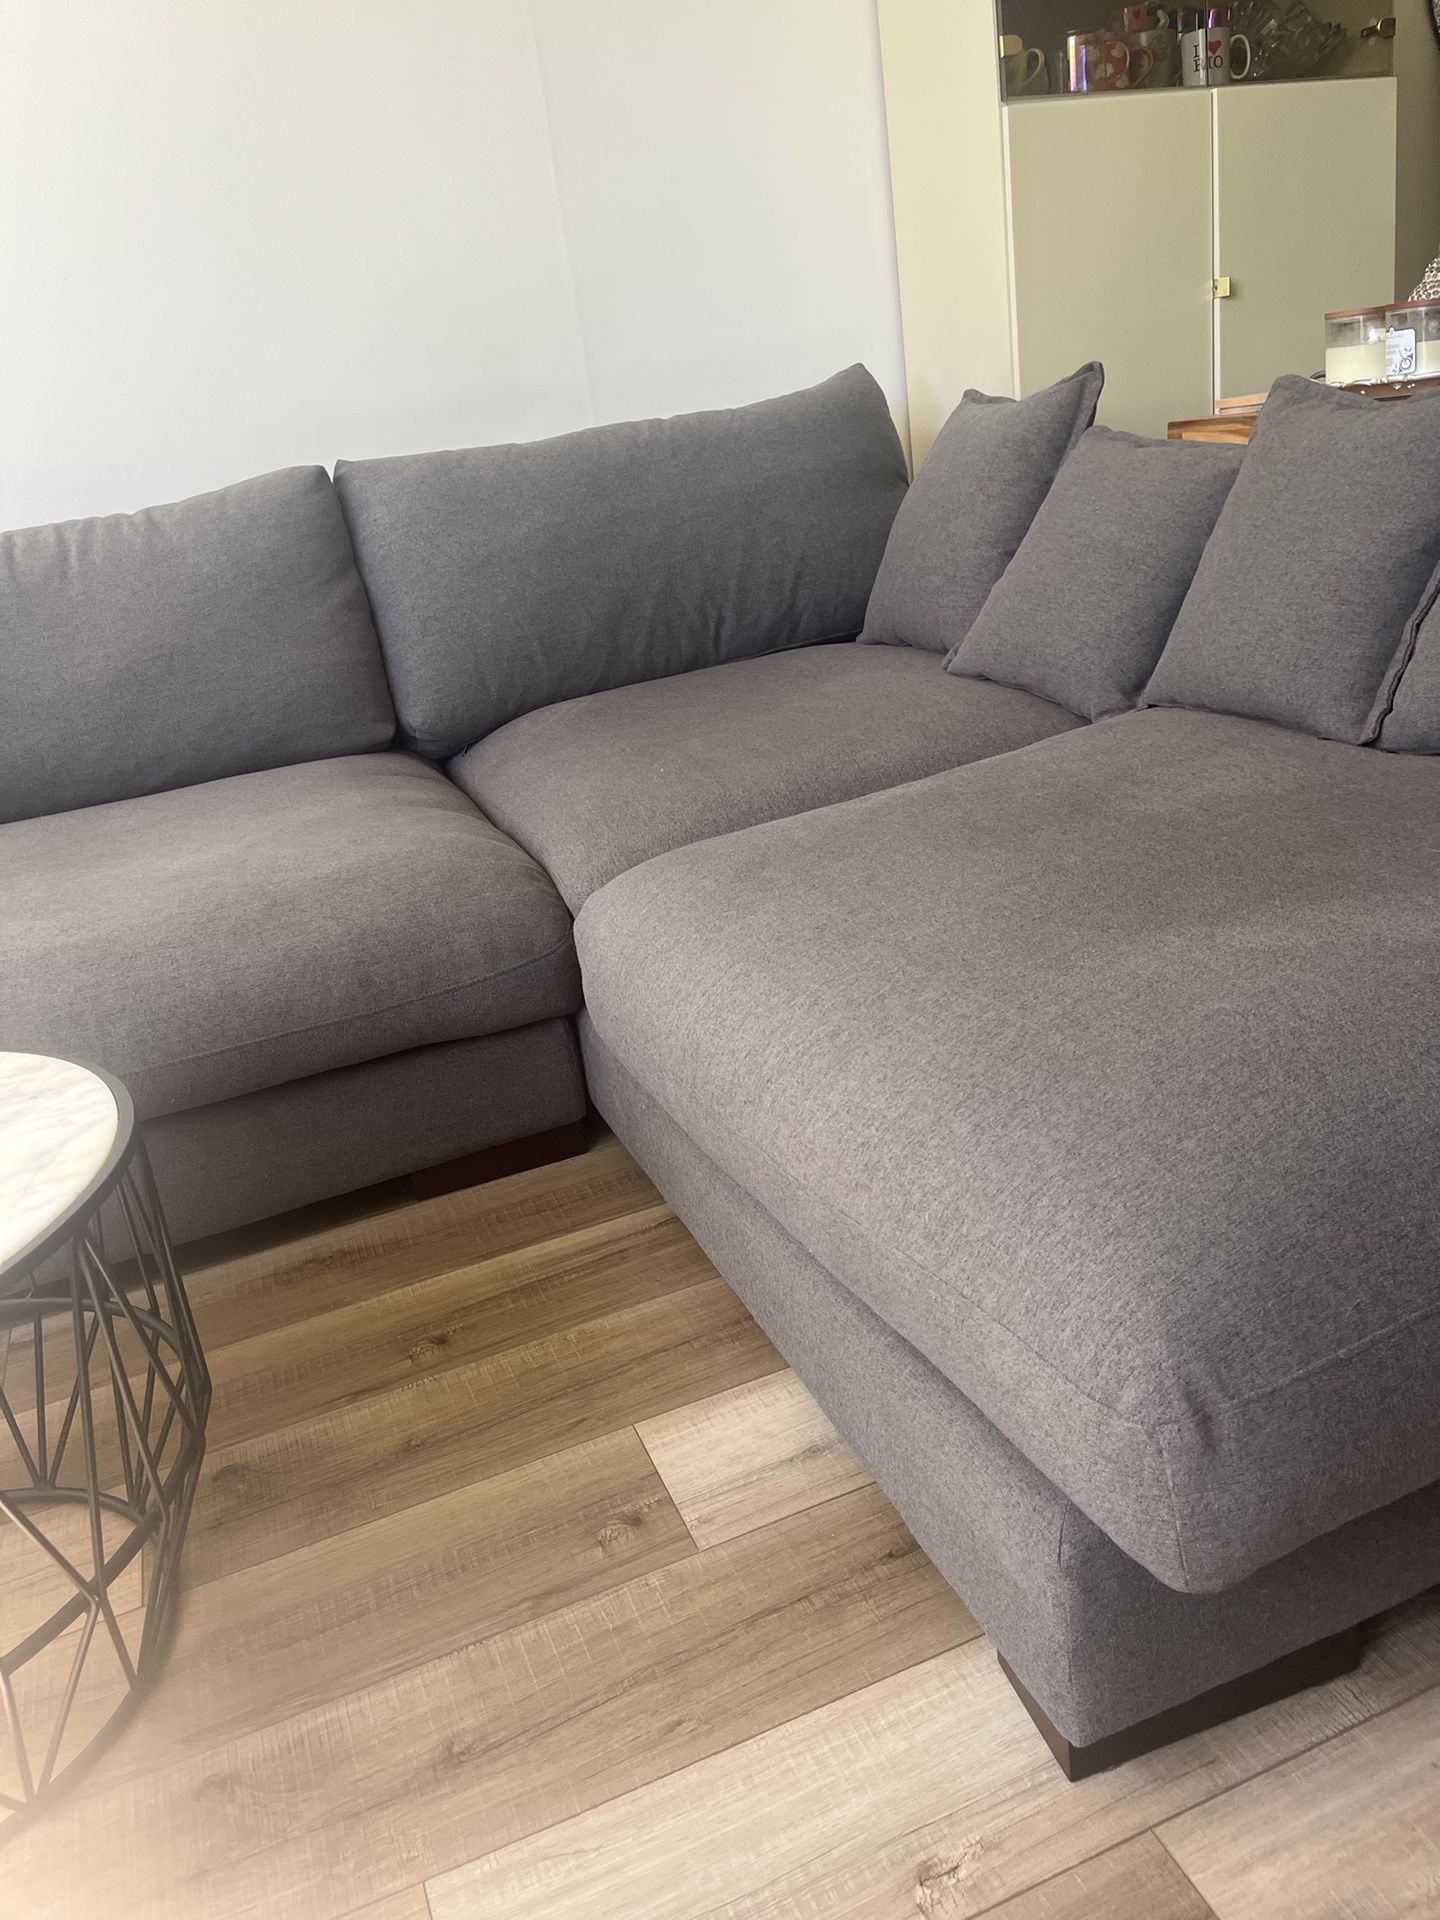 Sofa / Couch. ( " "  Designs Wayfair )Upholstered Reclining Sectional. Like Née Great Condition!! $857   Obo  T